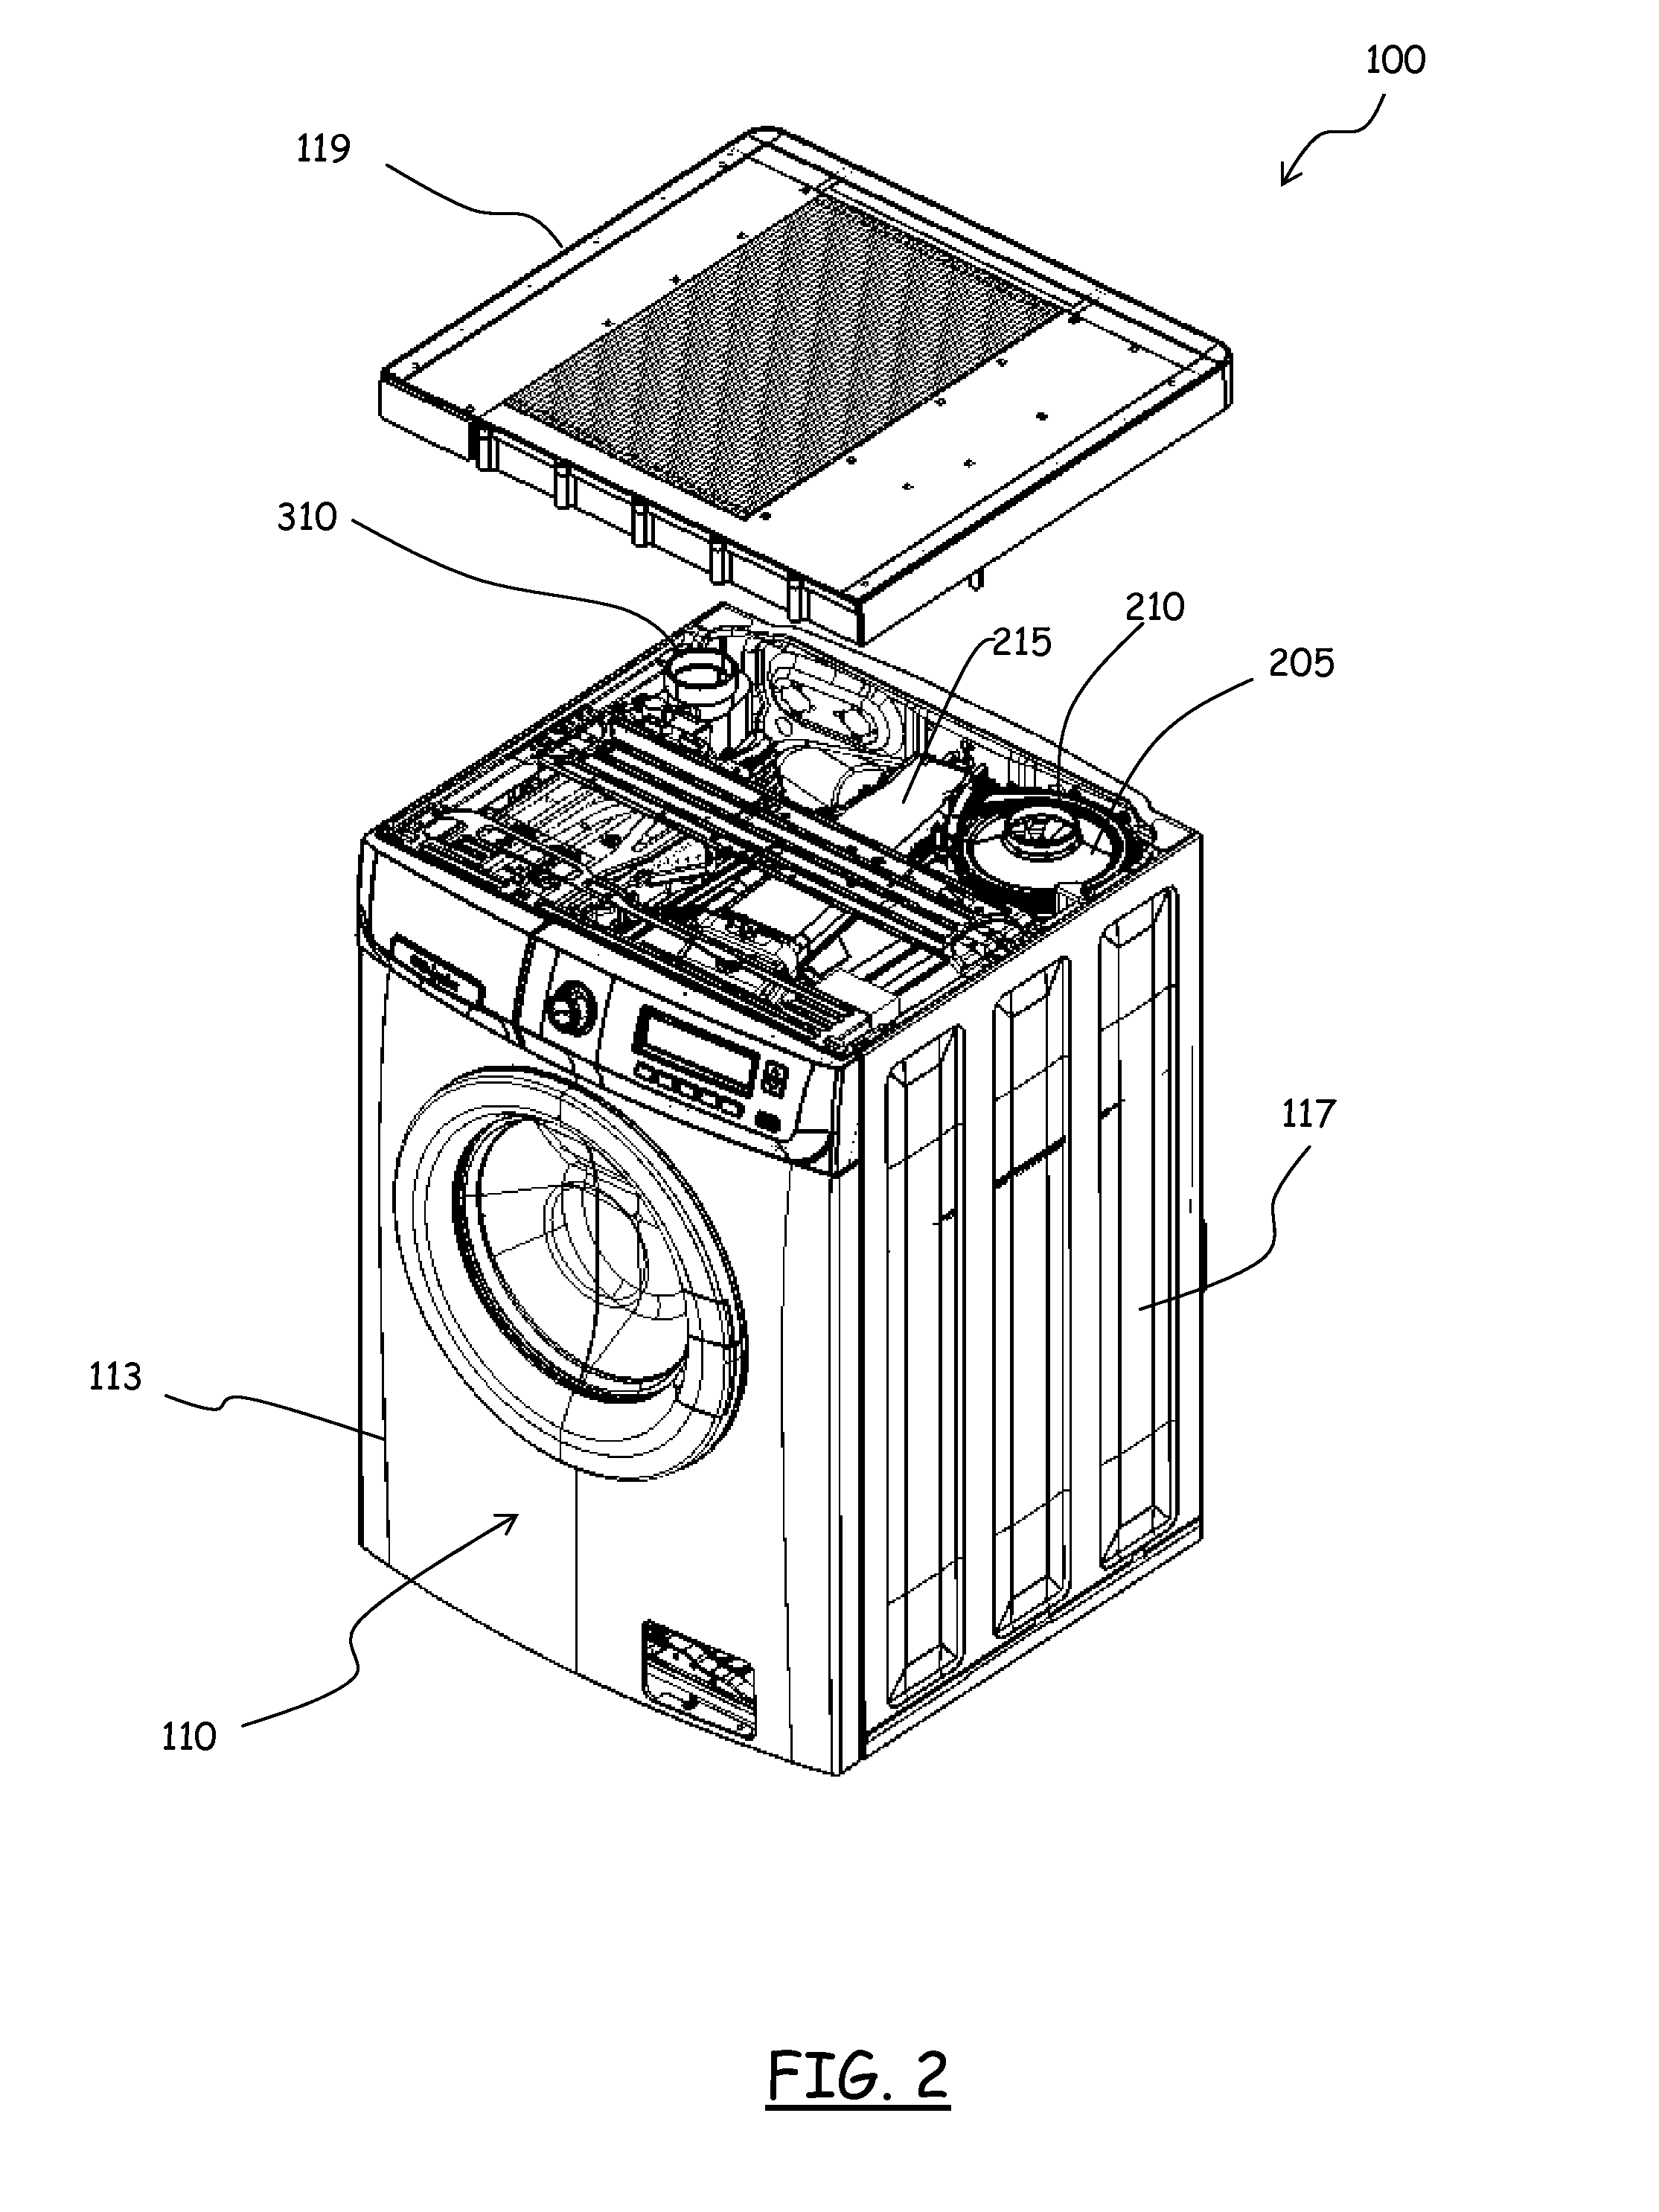 Appliance for drying laundry